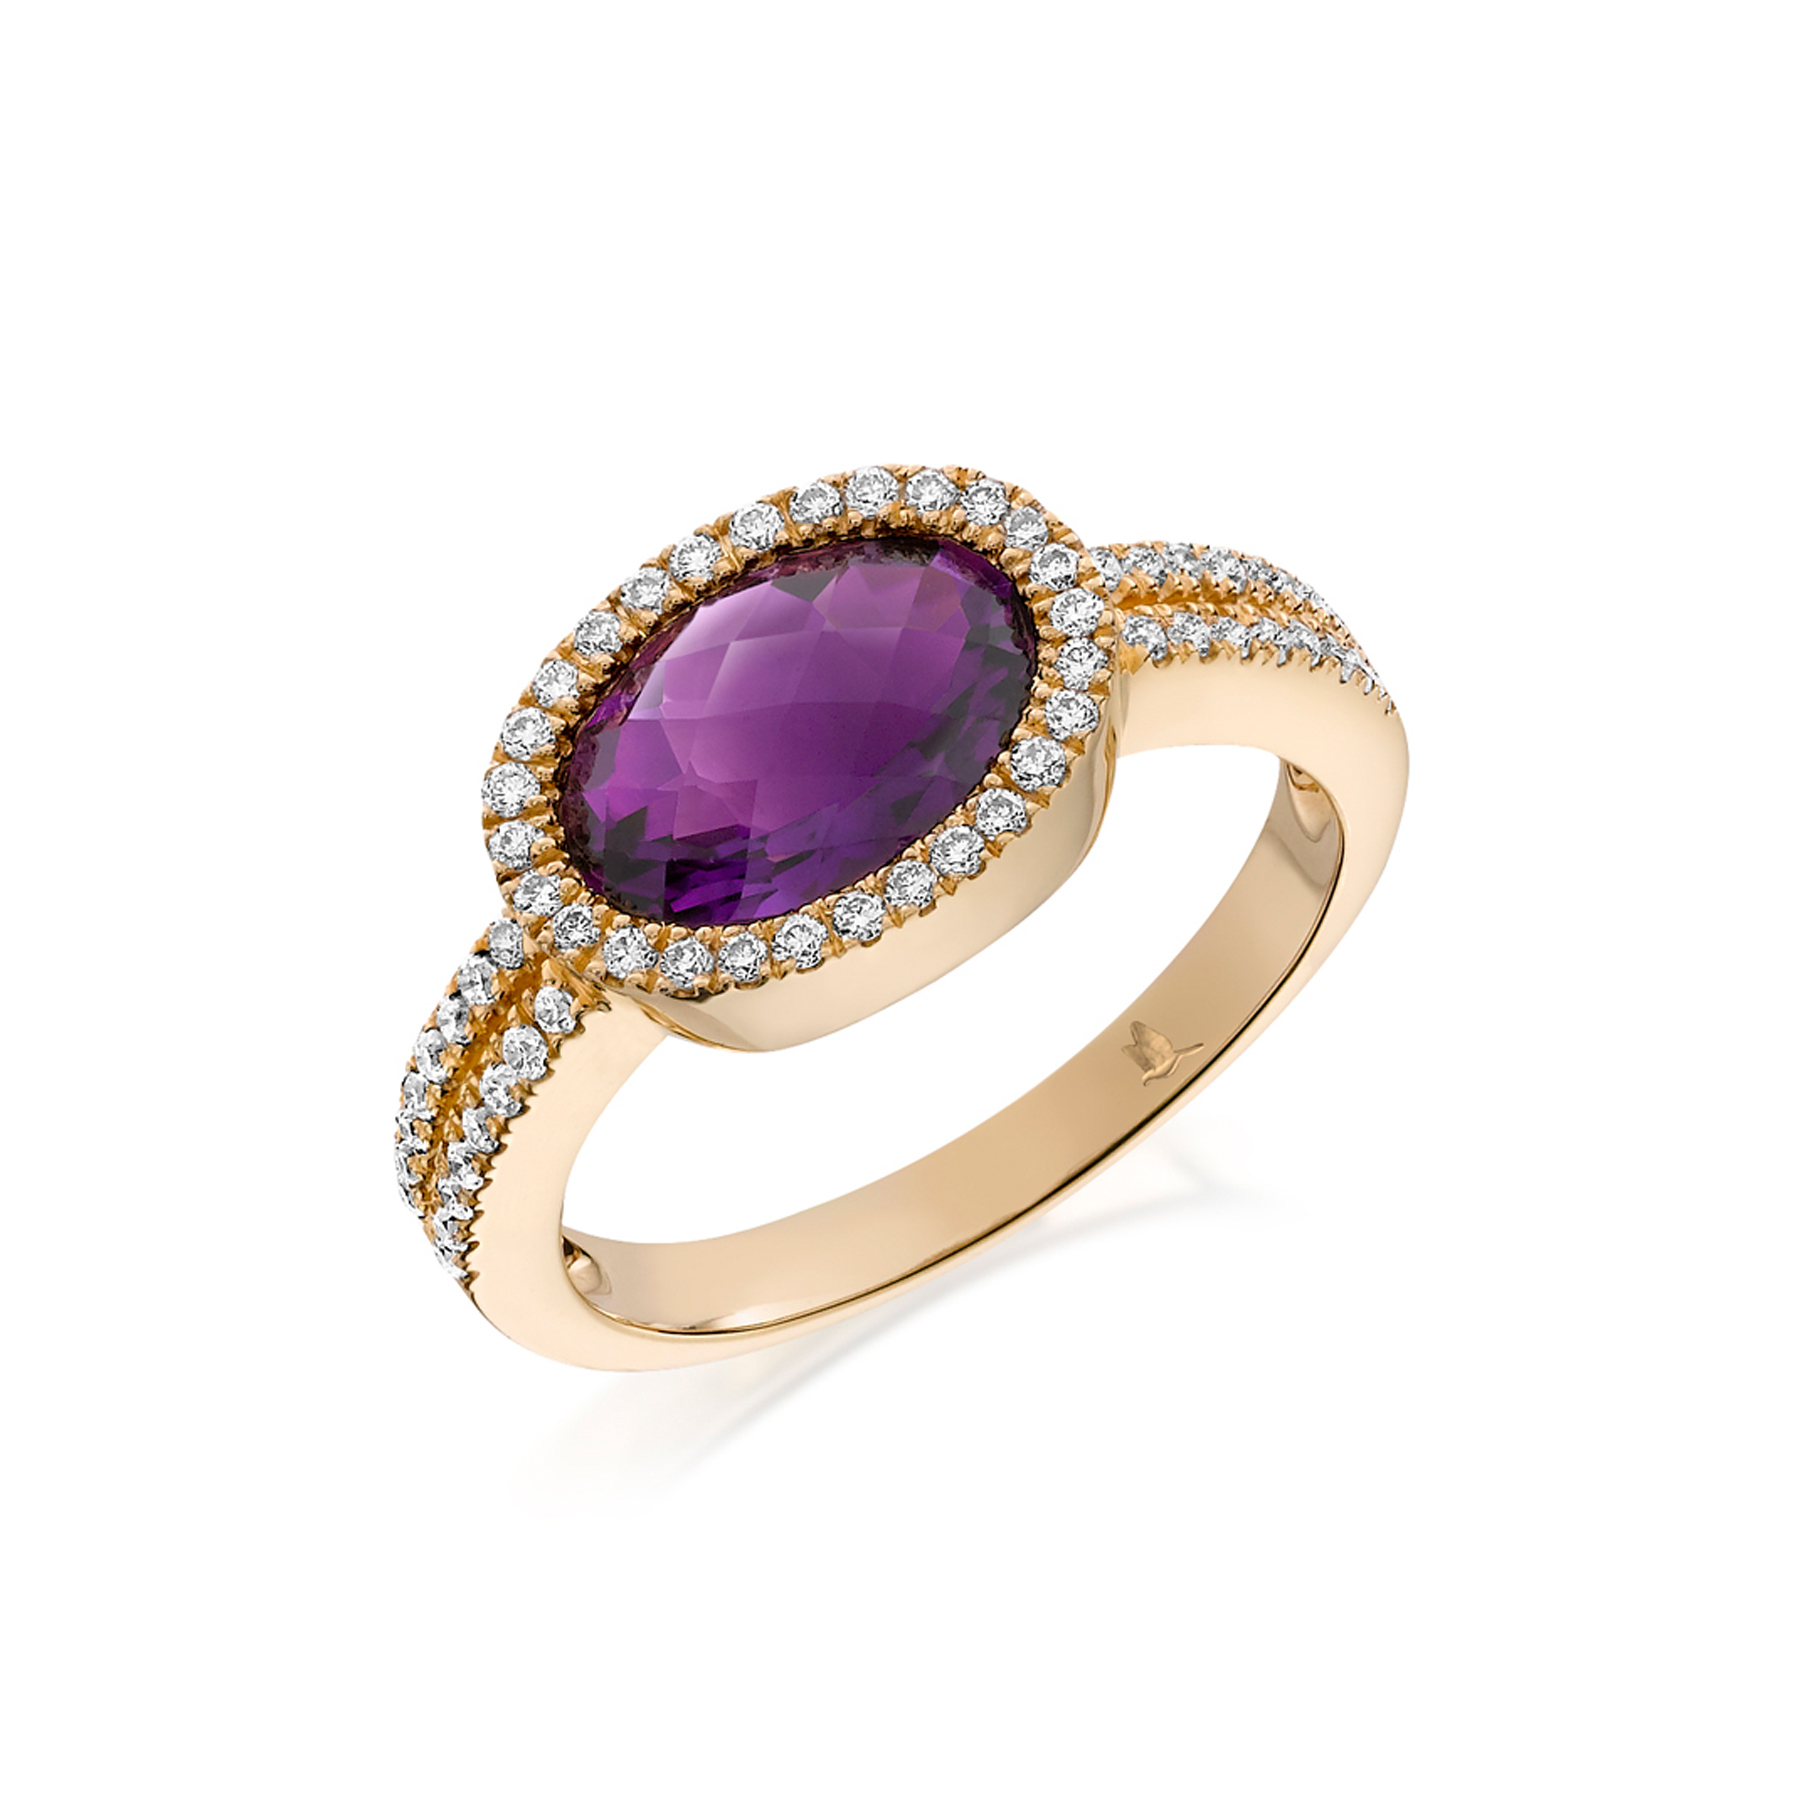 Oval amethyst ring with diamond surround